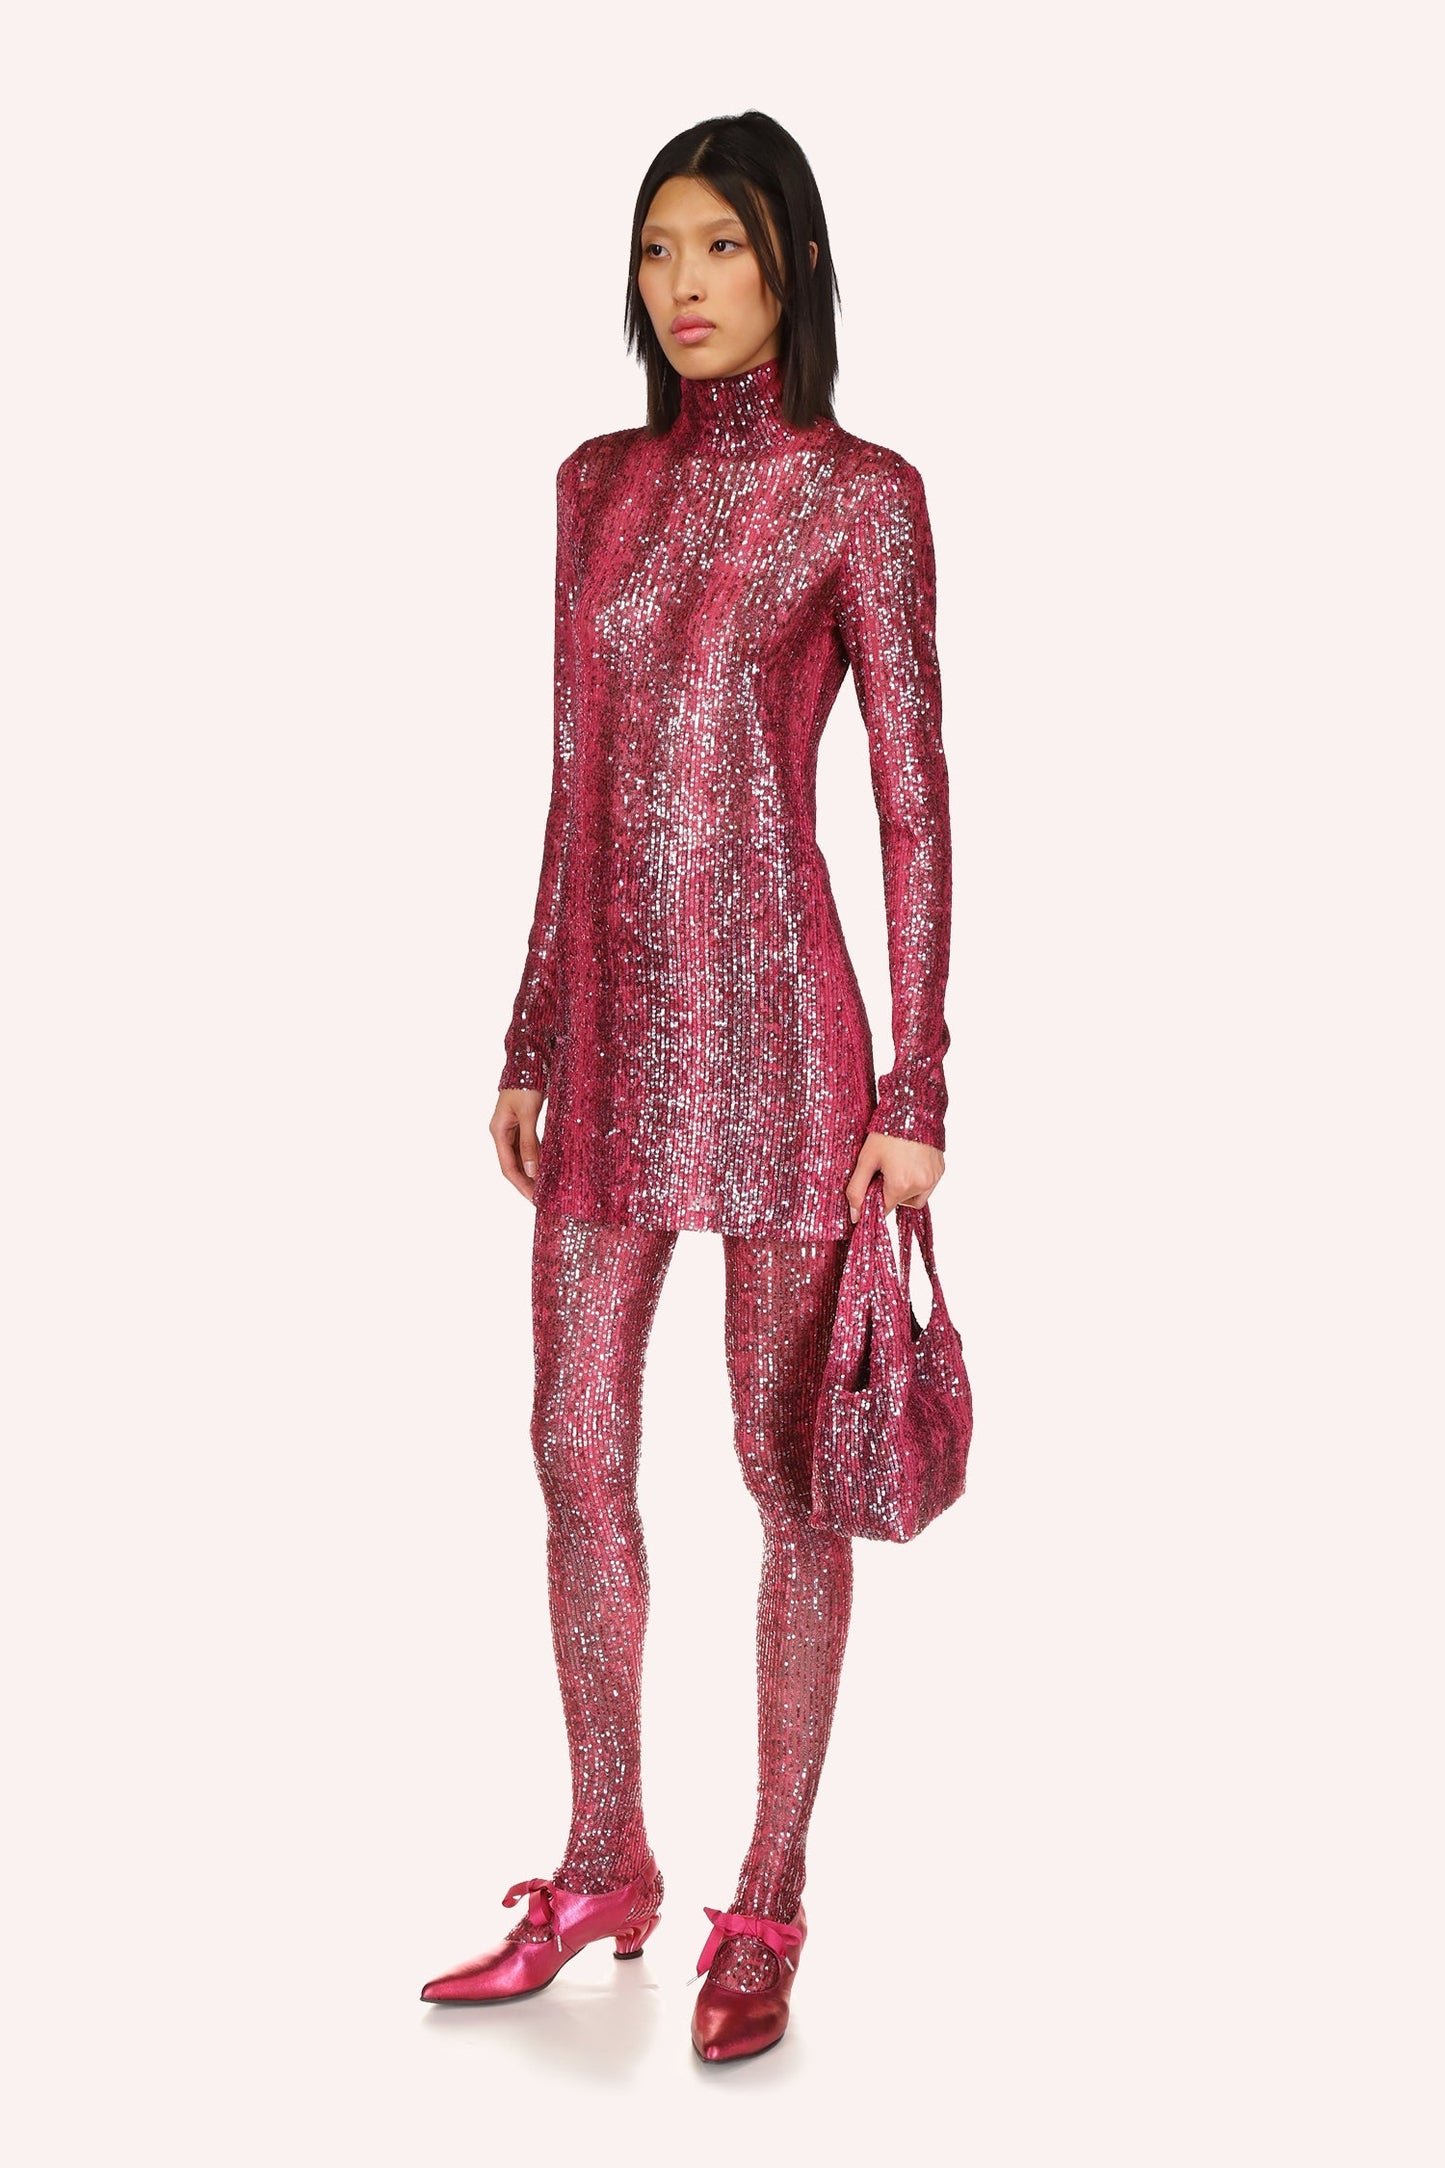 Glamorous long sleeves, turtleneck mini dress, shiny ruby red, designed with attention to detail